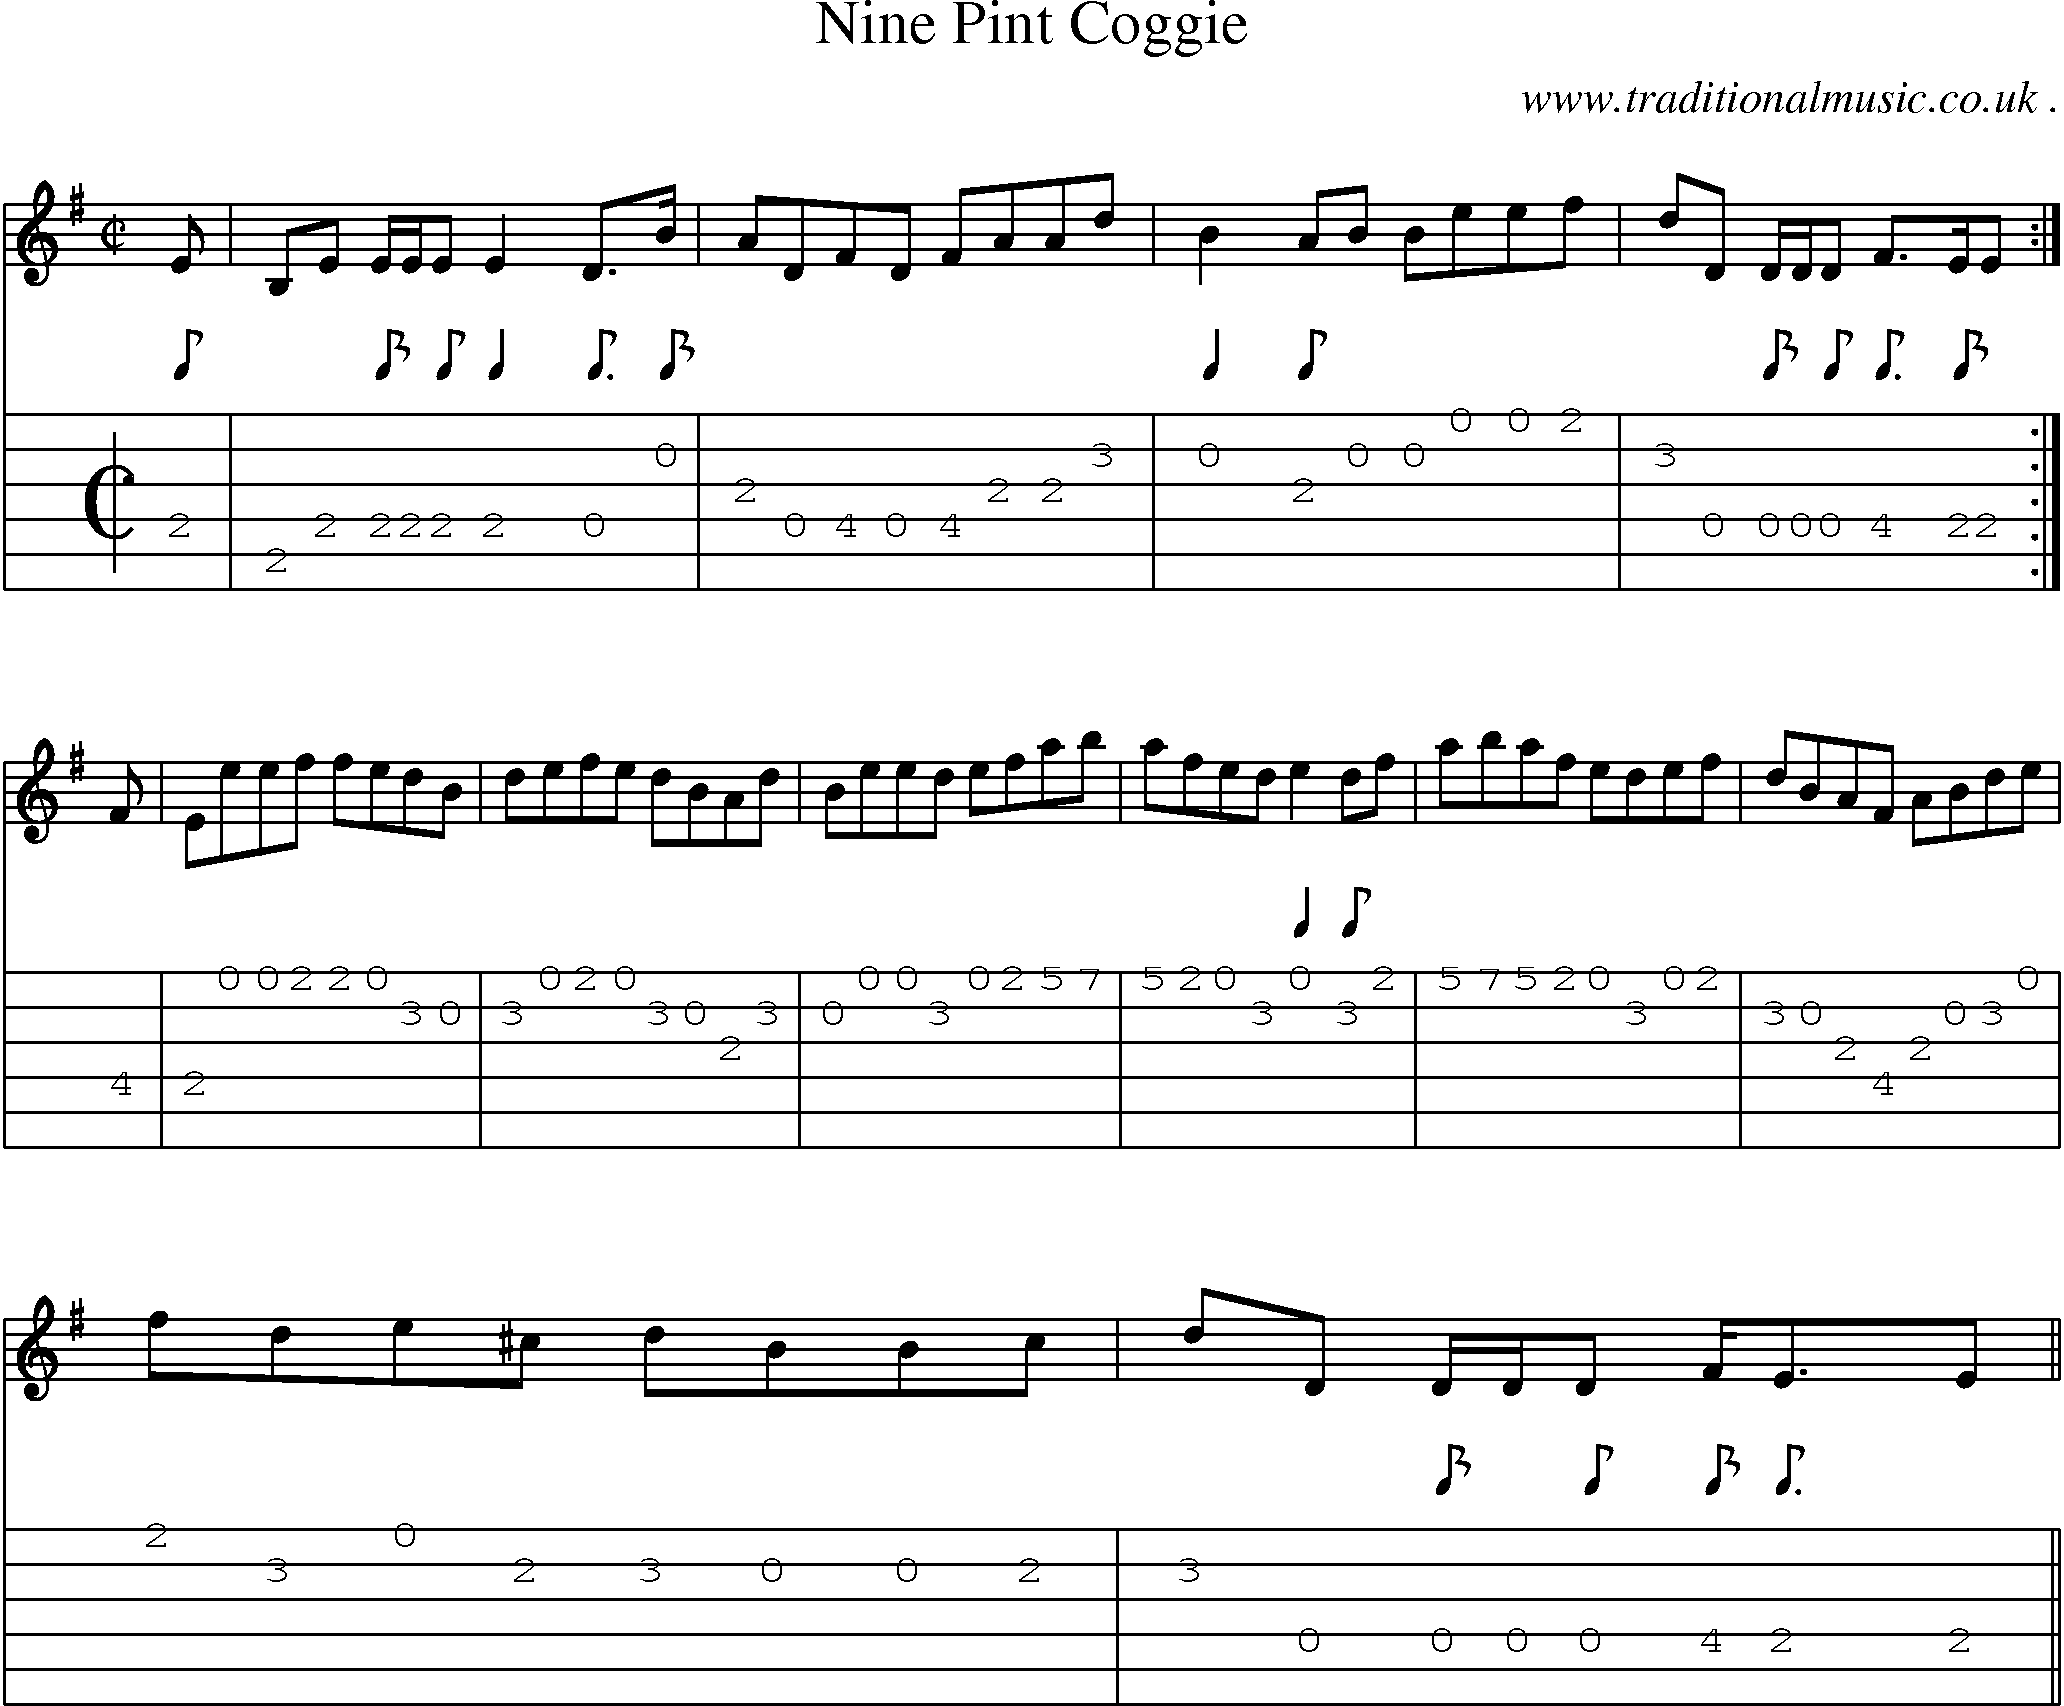 Sheet-music  score, Chords and Guitar Tabs for Nine Pint Coggie